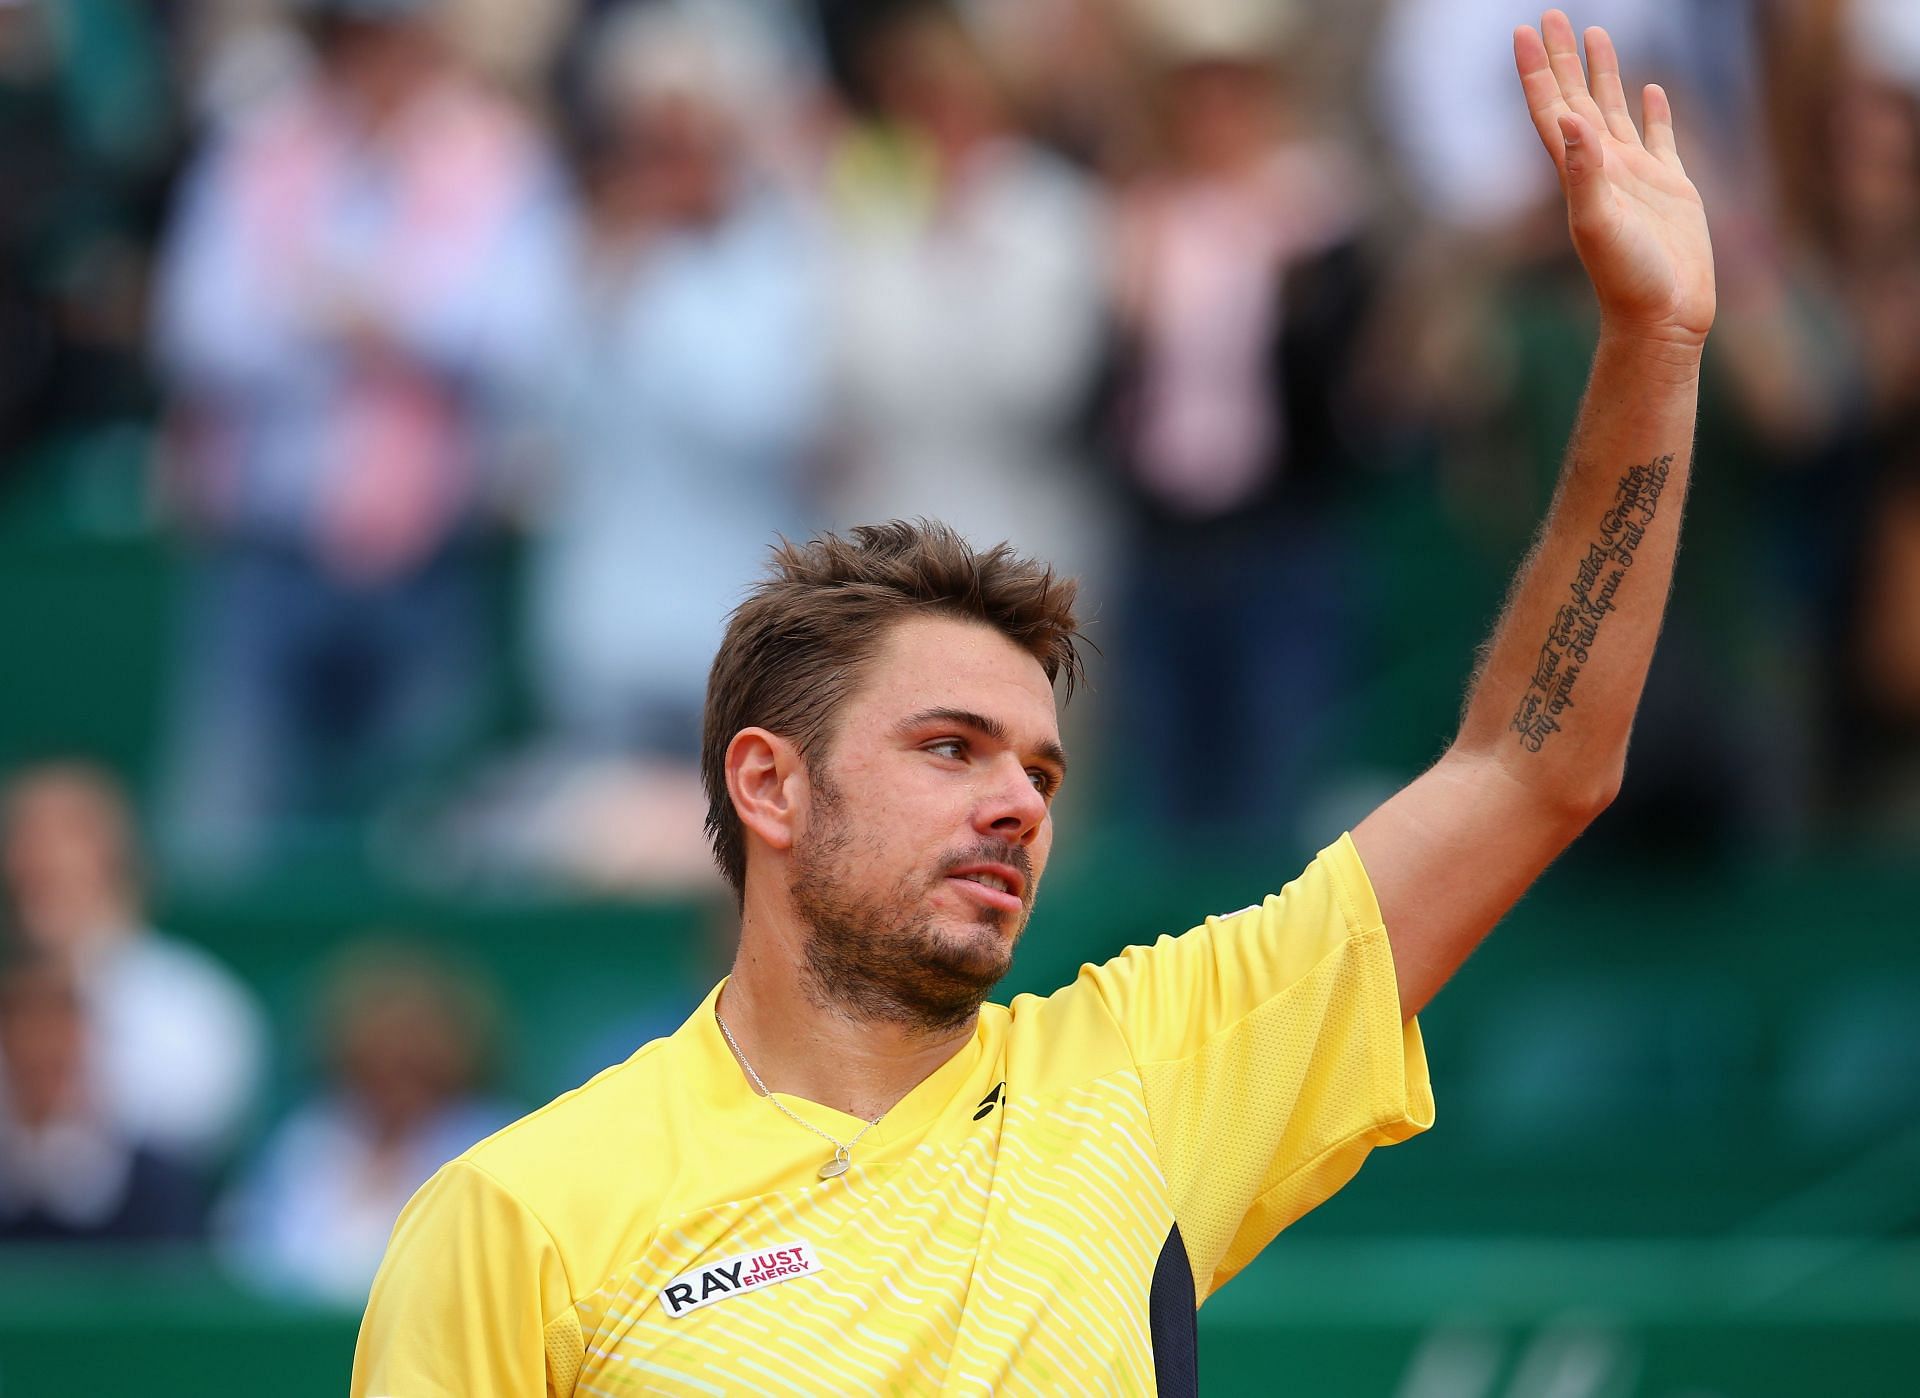 Stan Wawrinka won the Monte-Carlo Masters in 2014 for his first Masters title